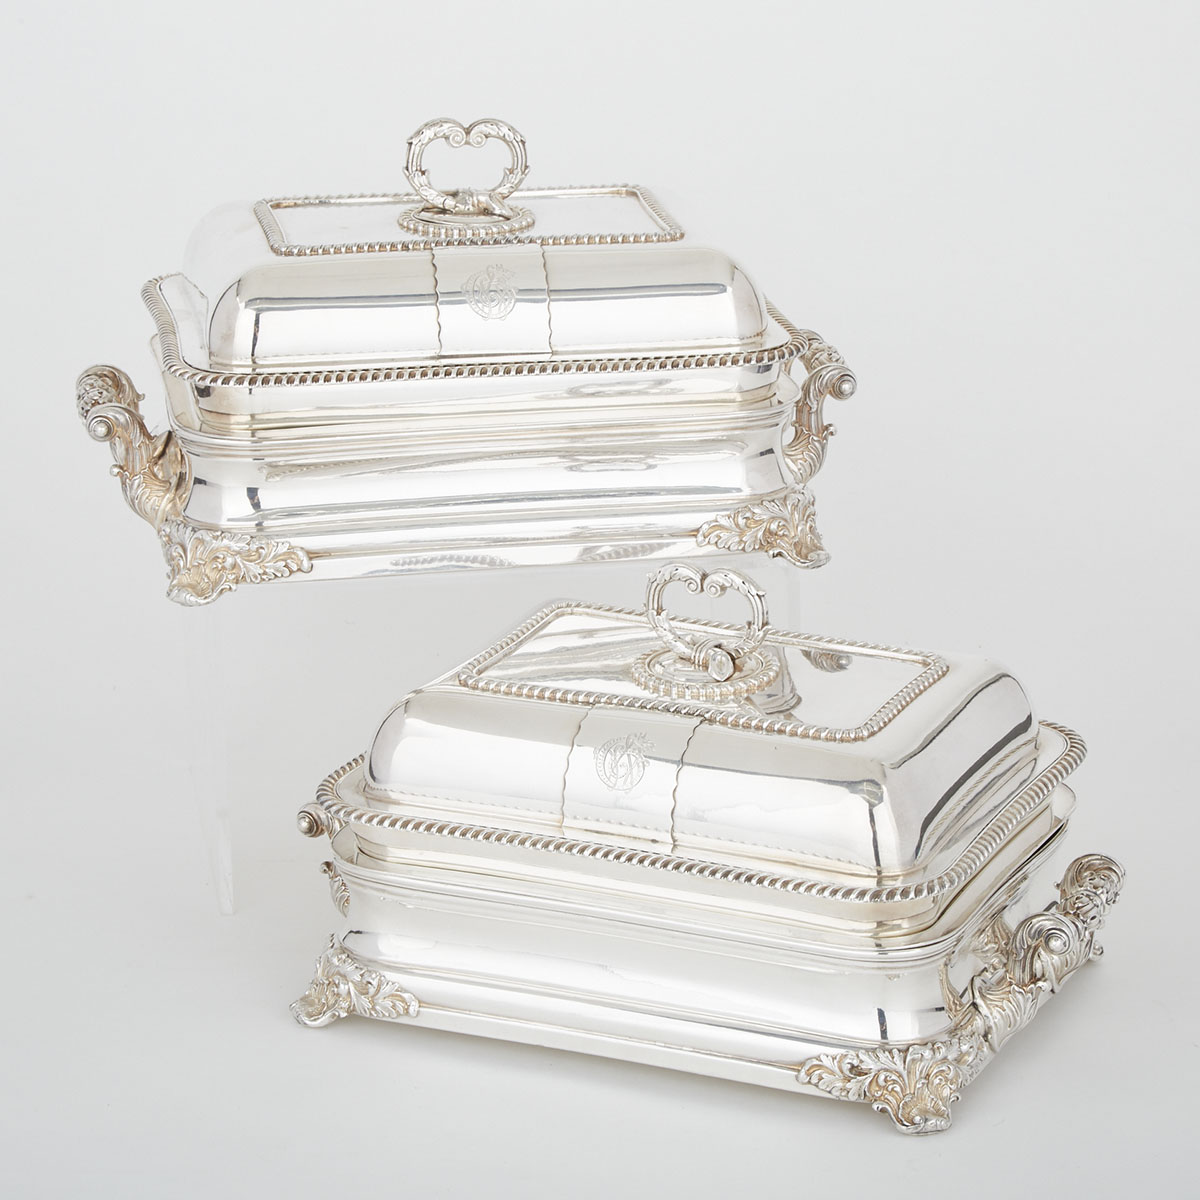 Pair of Old Sheffield Plate Rectangular Entrée Dishes with Covers and Warming Stands, early 19th century